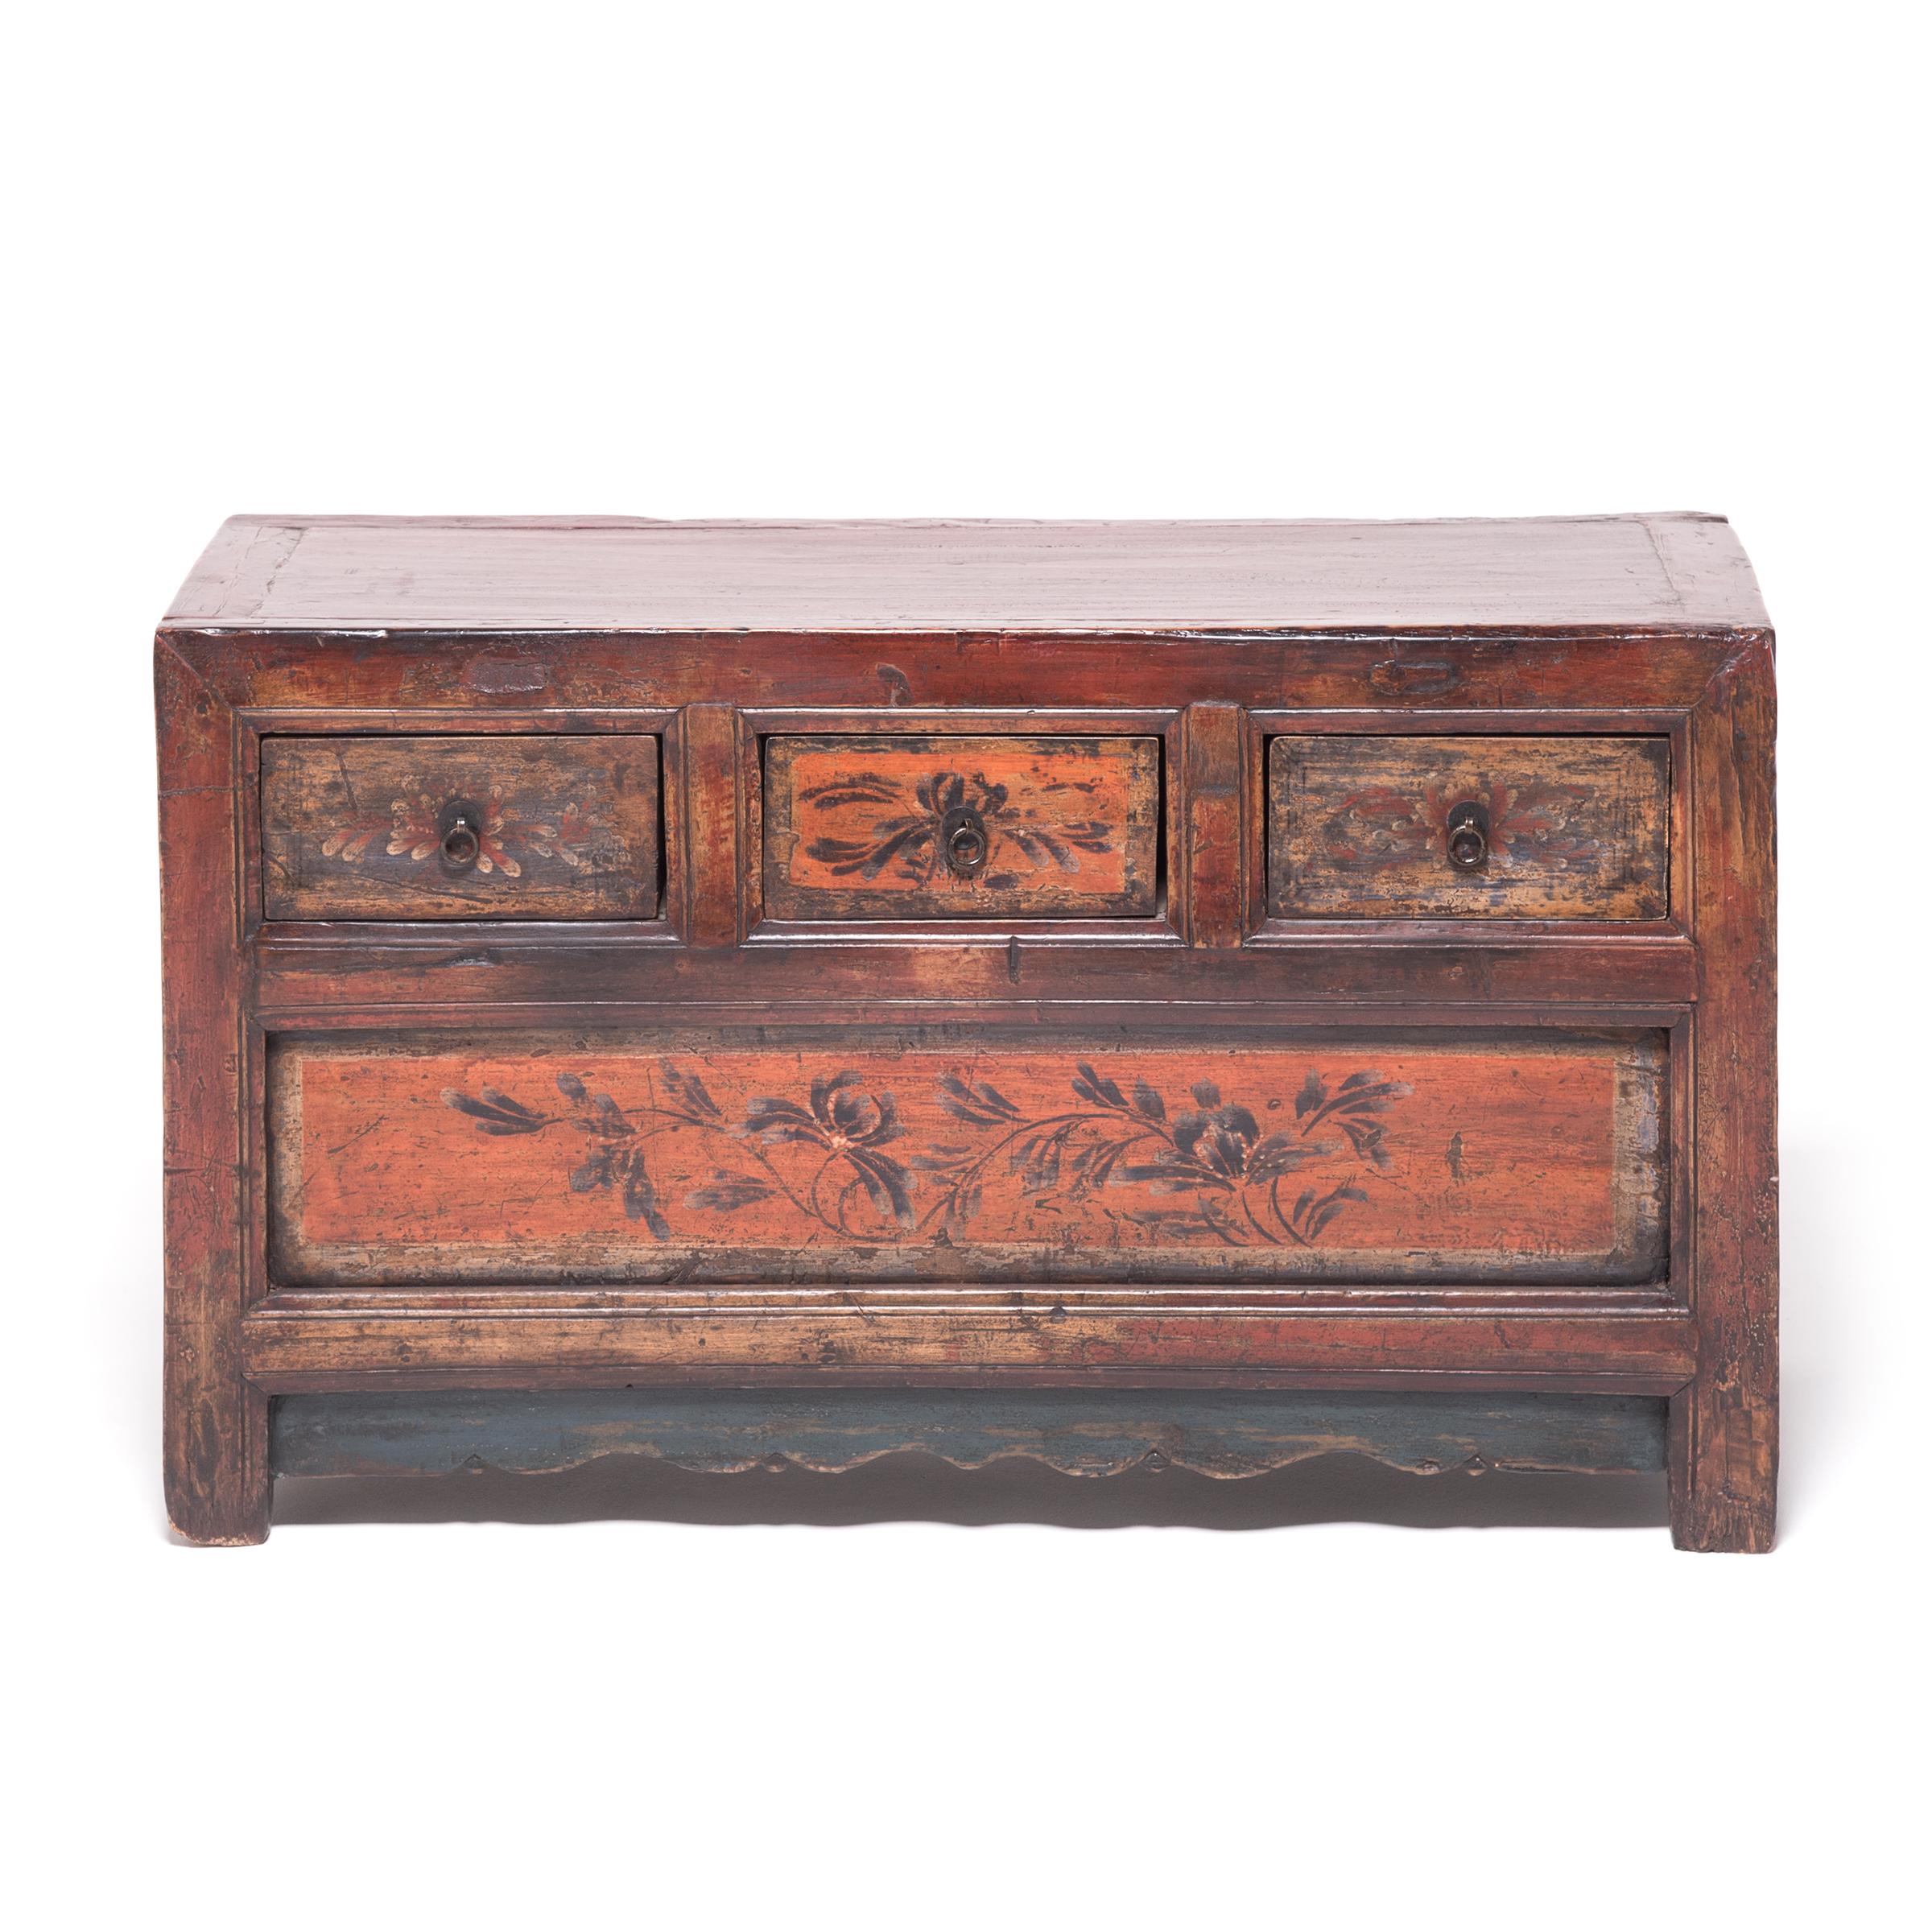 This pair of Provincial 19th century low chests from Mongolia were crafted of pine and cloaked in layer upon layer of rich red lacquer. The drawers were then hand-painted with graceful flowers and trailing vines, accented by simple brass hardware.